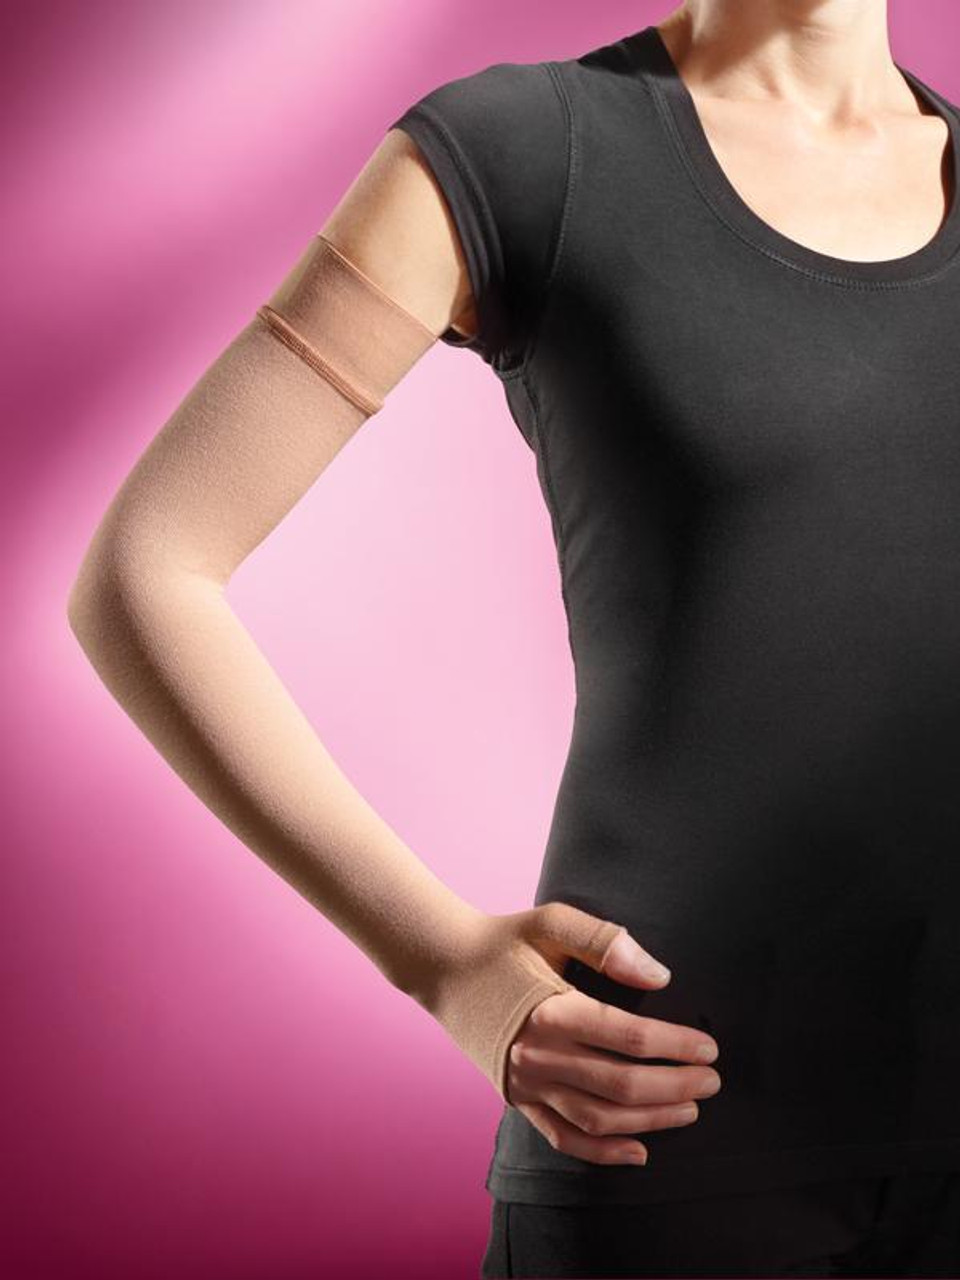 Lymphedema Armsleeve  Lymphedema Compression Garment - GraceMd -  Mastectomy Bras & Breast Forms